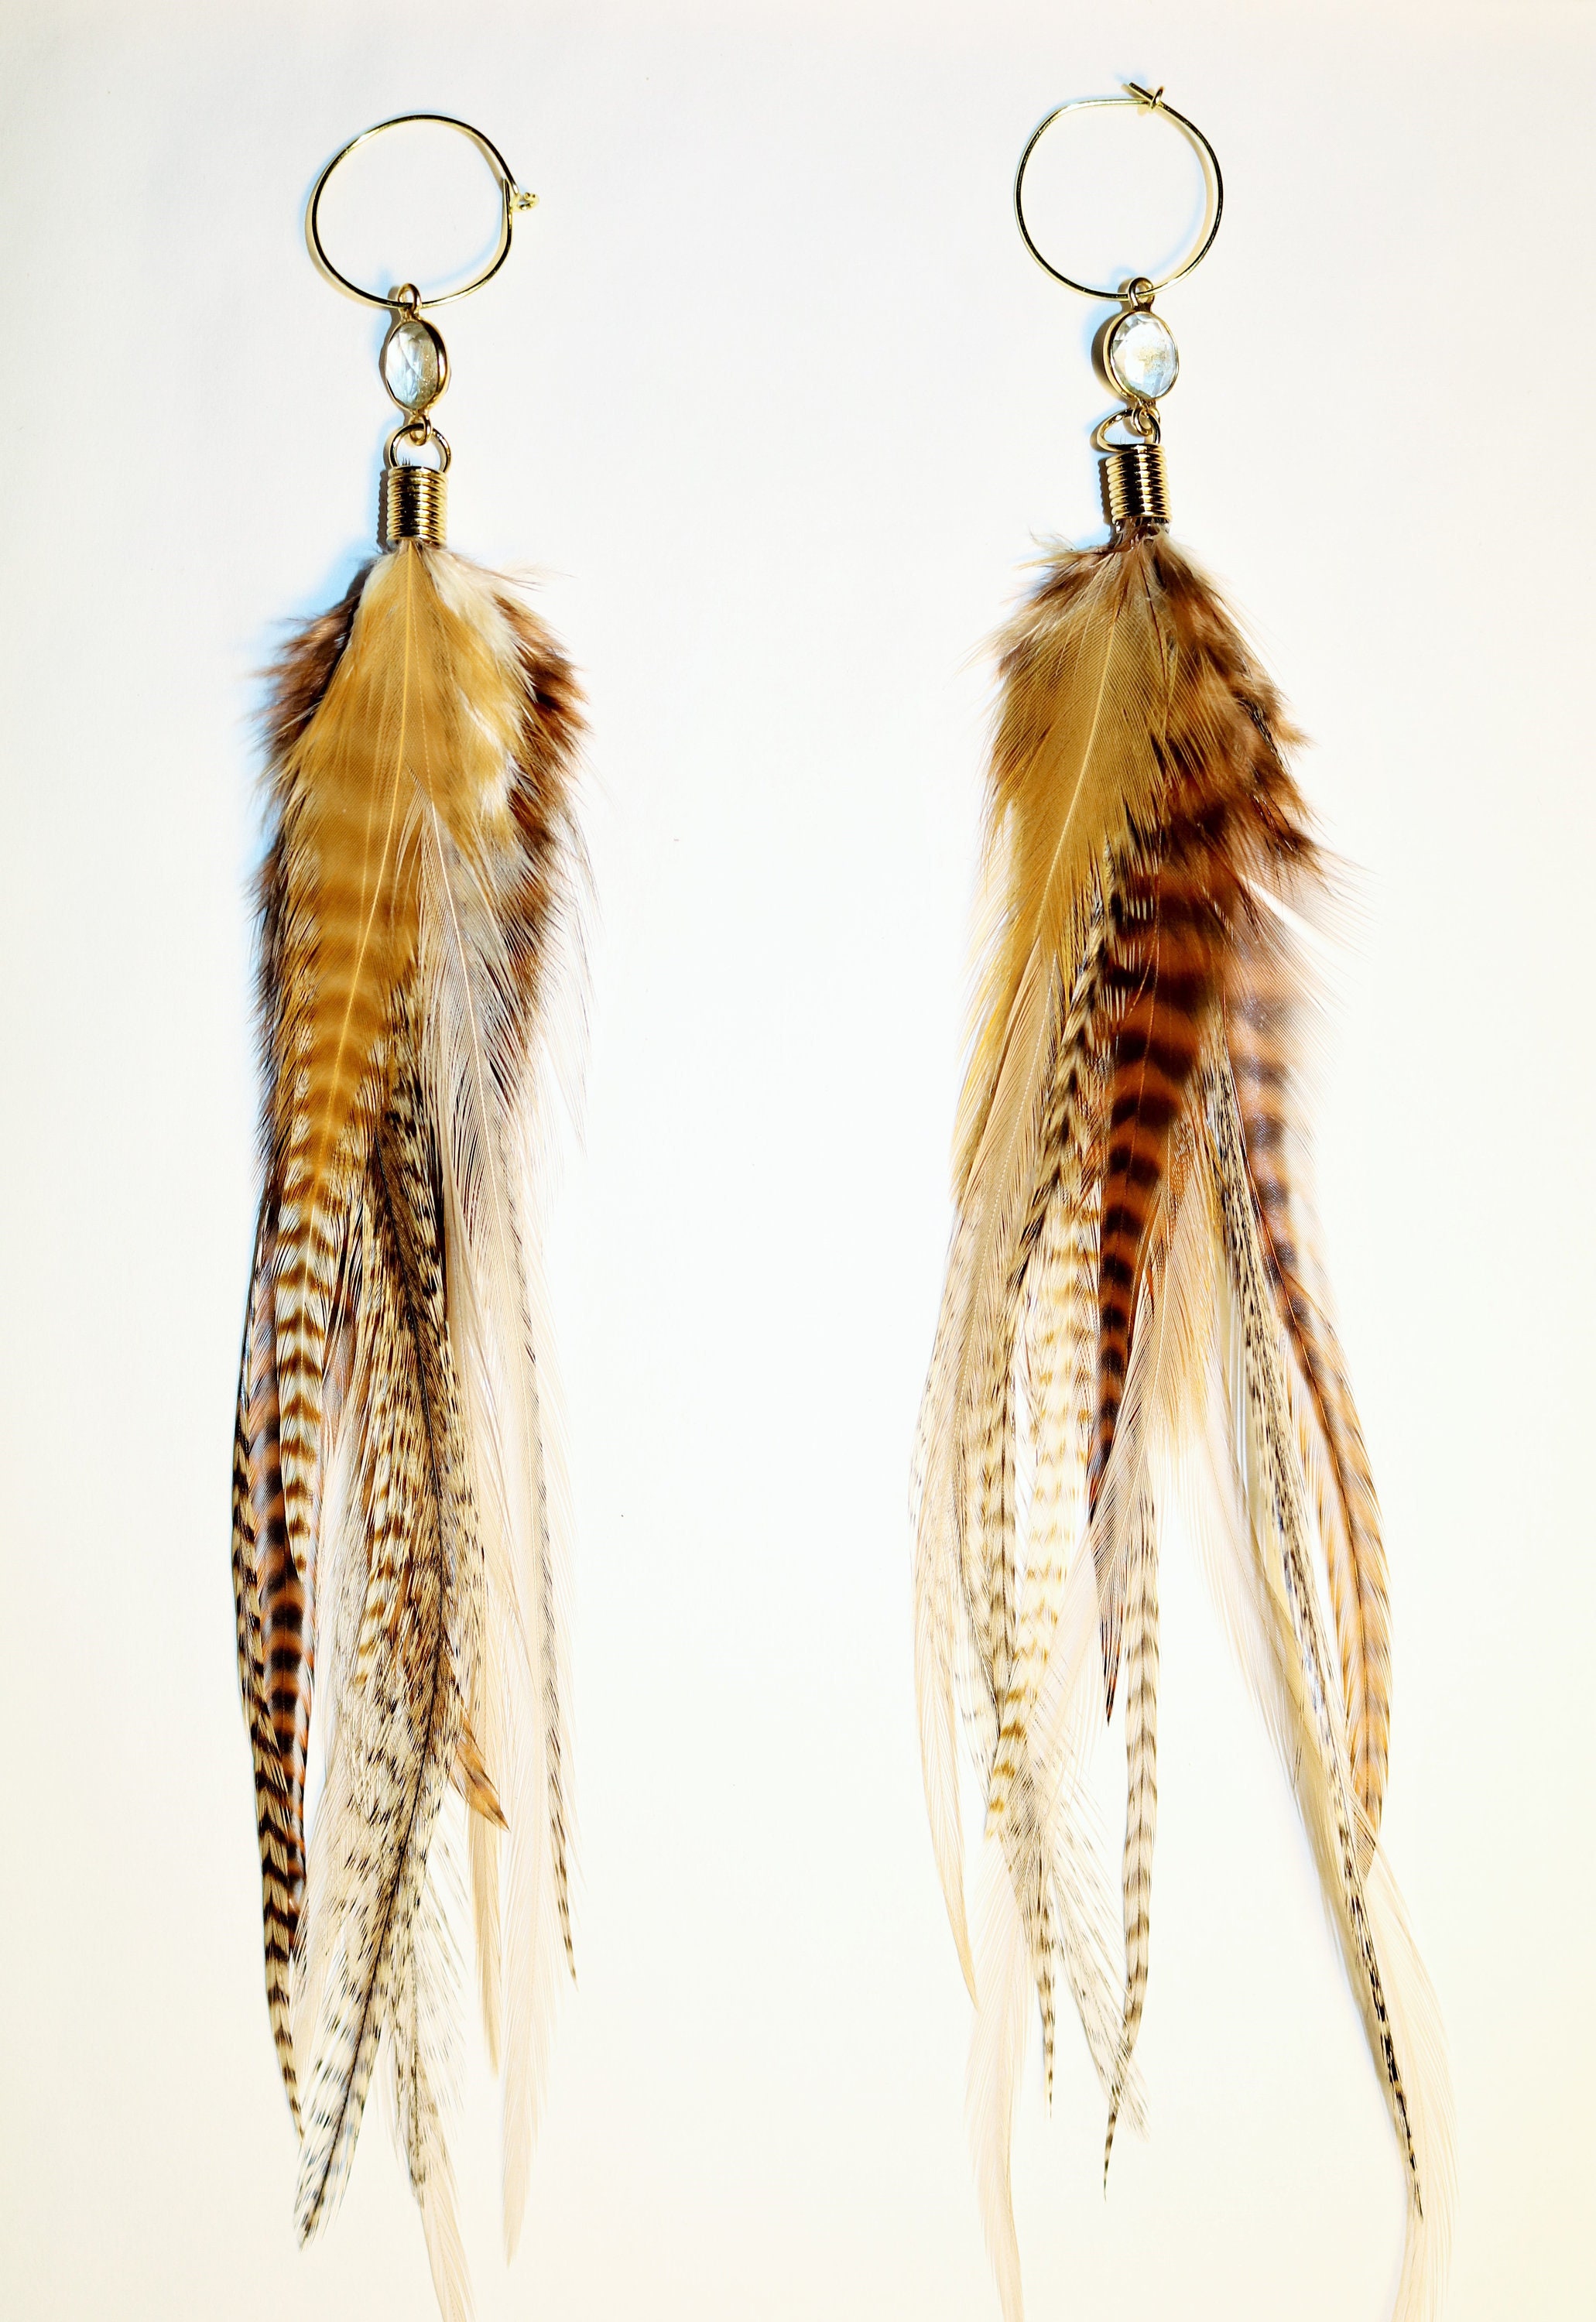 Pendant feather earrings with real crystal gemstone,brown,tan and ...